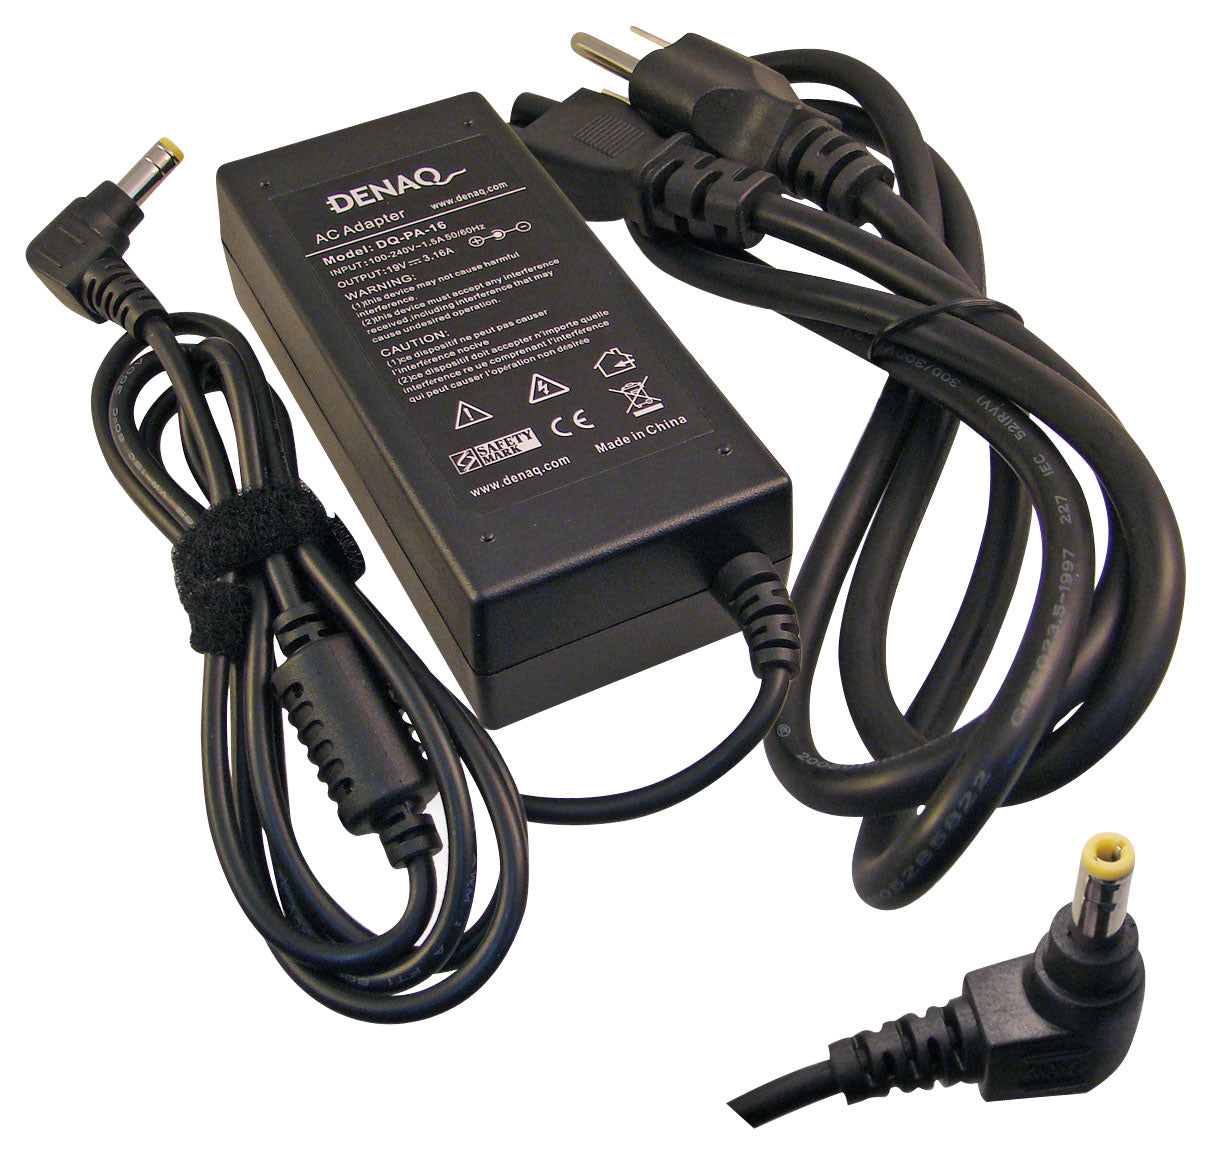 DENAQ - DQ-PA-16-5525 AC Power Adapter and Charger for Select Dell Inspiron and Latitude Laptops - Black